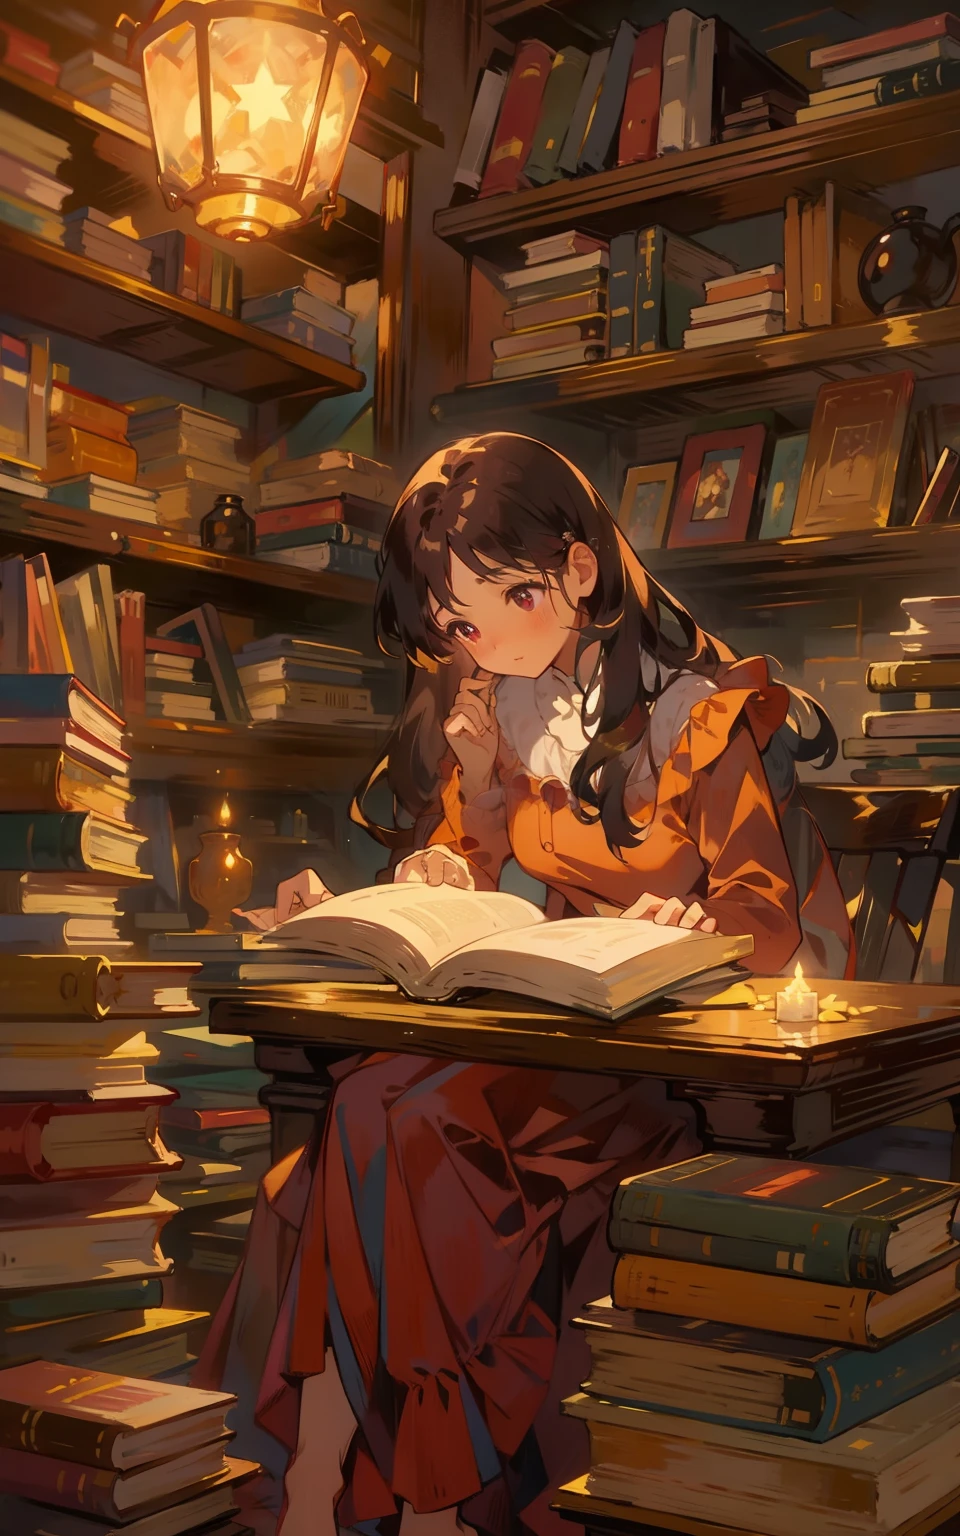 4. Maroon bookish time：A beautiful maiden sits at a maroon desk，She was wearing a dress，Read a book intently，Surrounded by the aroma of books and warm lighting。